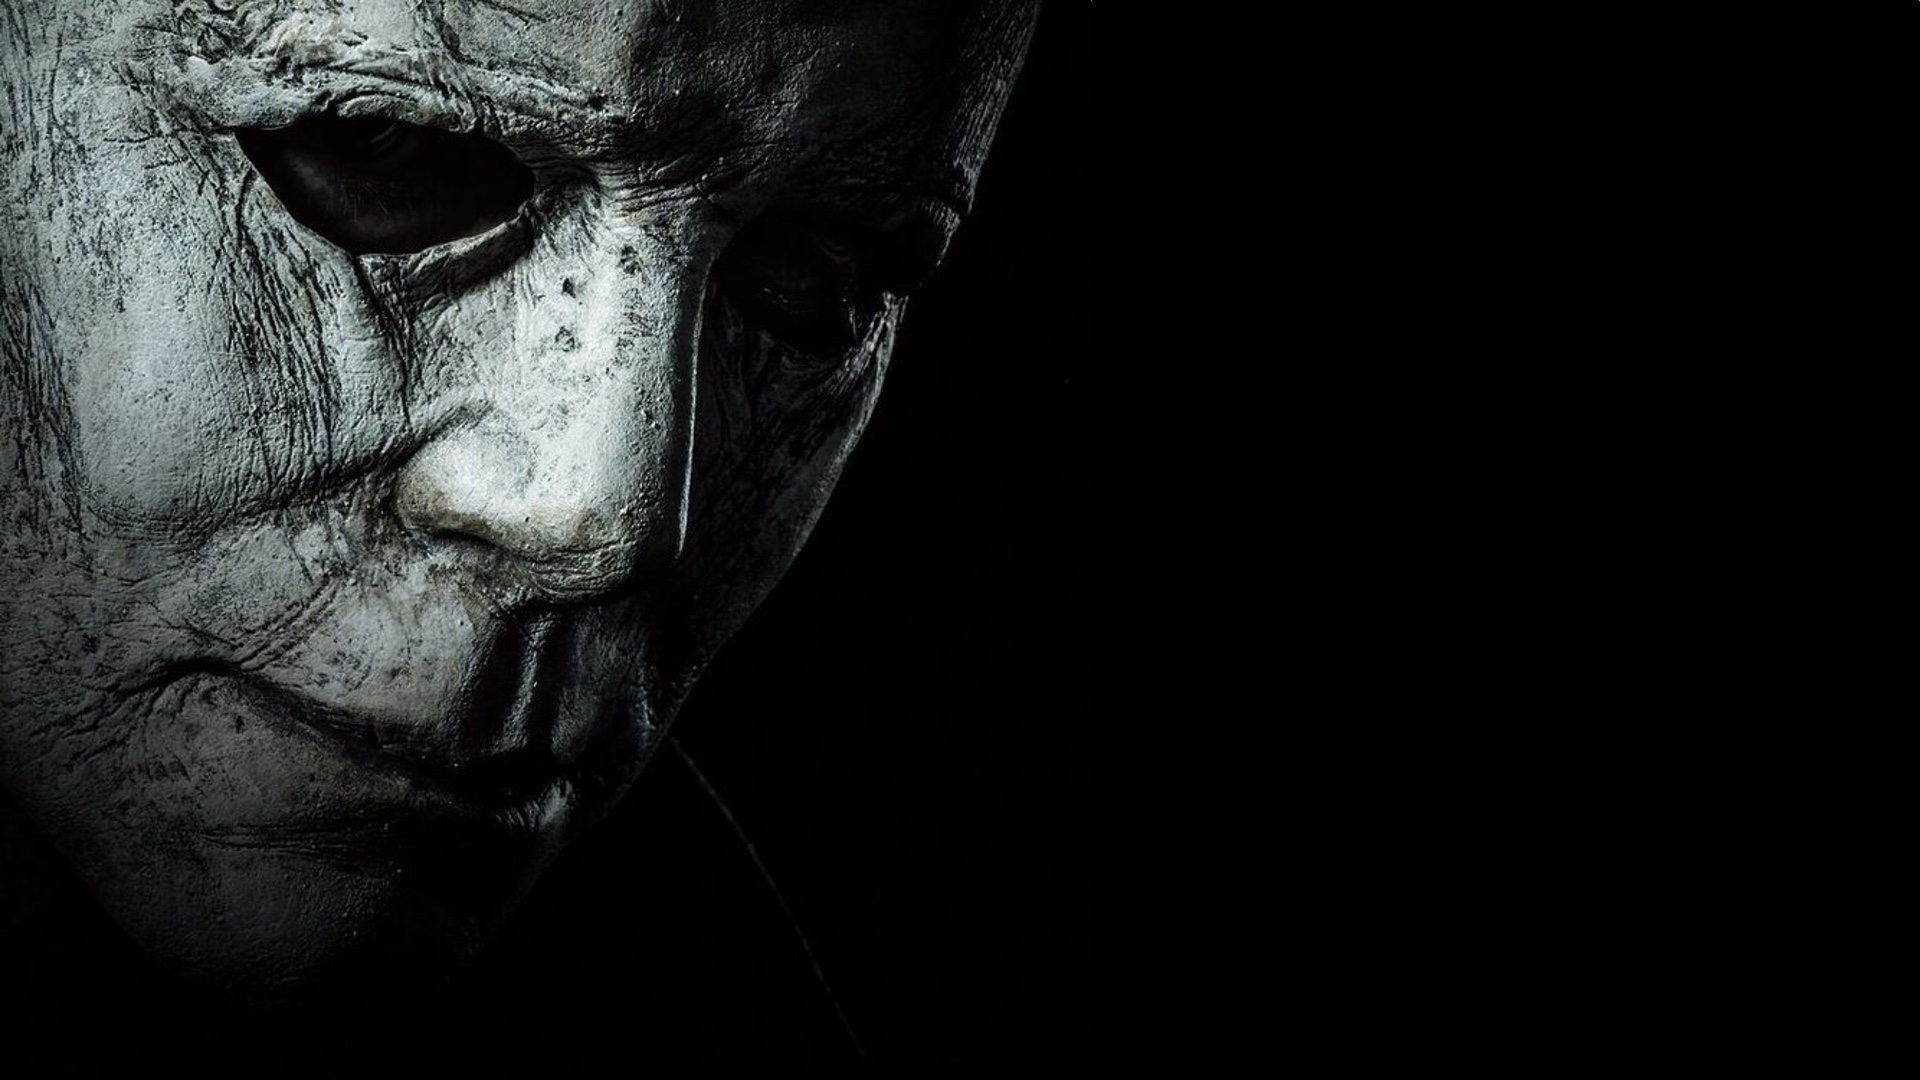 The First Trailer For The New HALLOWEEN Film Premiered at CinemaCon ...